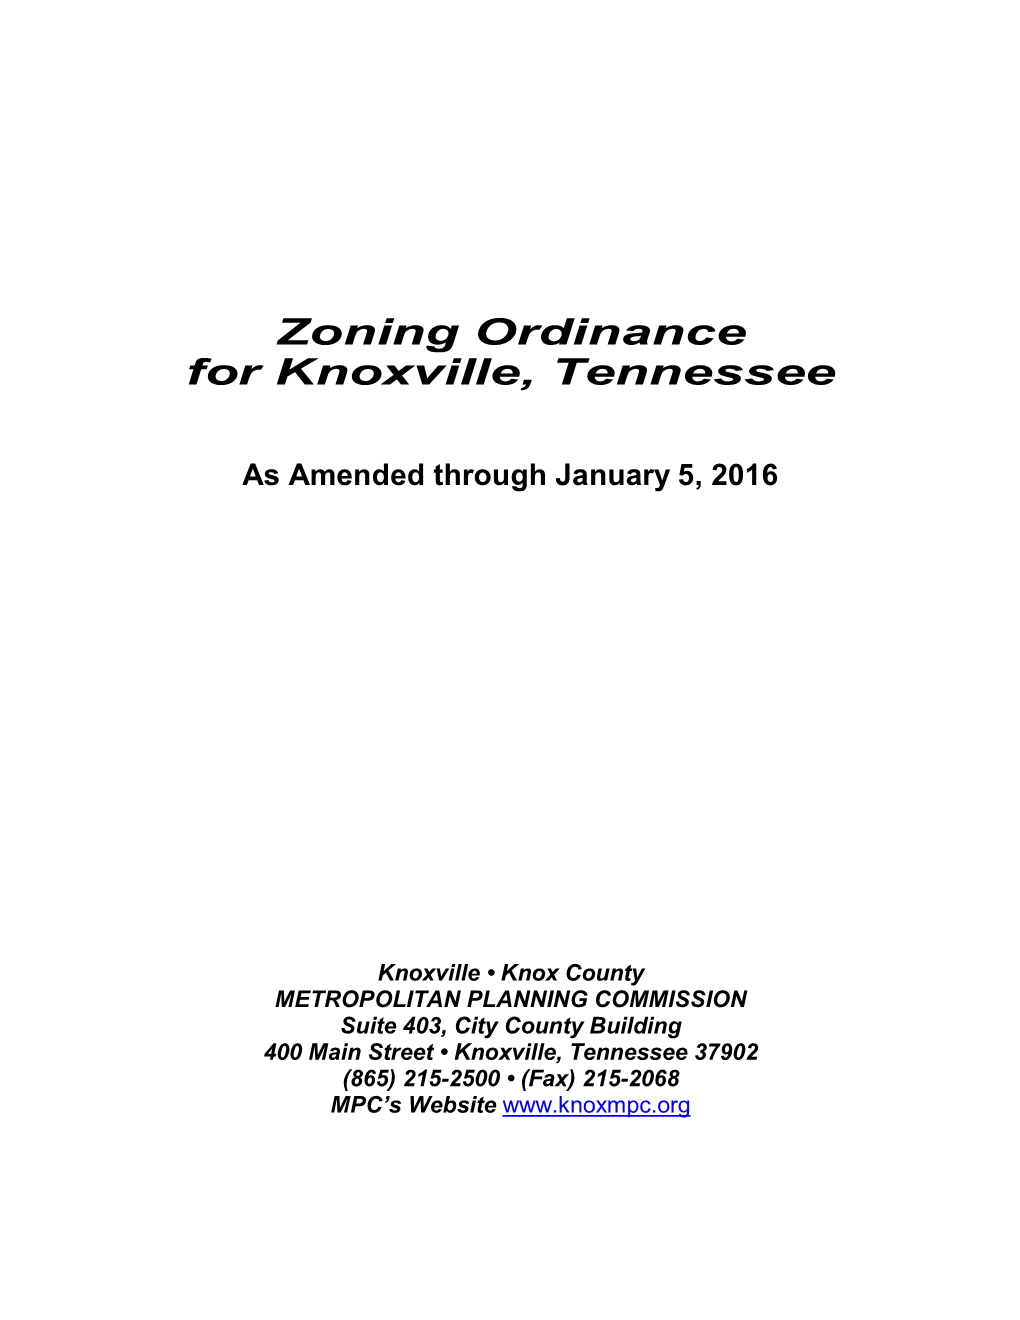 Zoning Ordinance for Knoxville, Tennessee